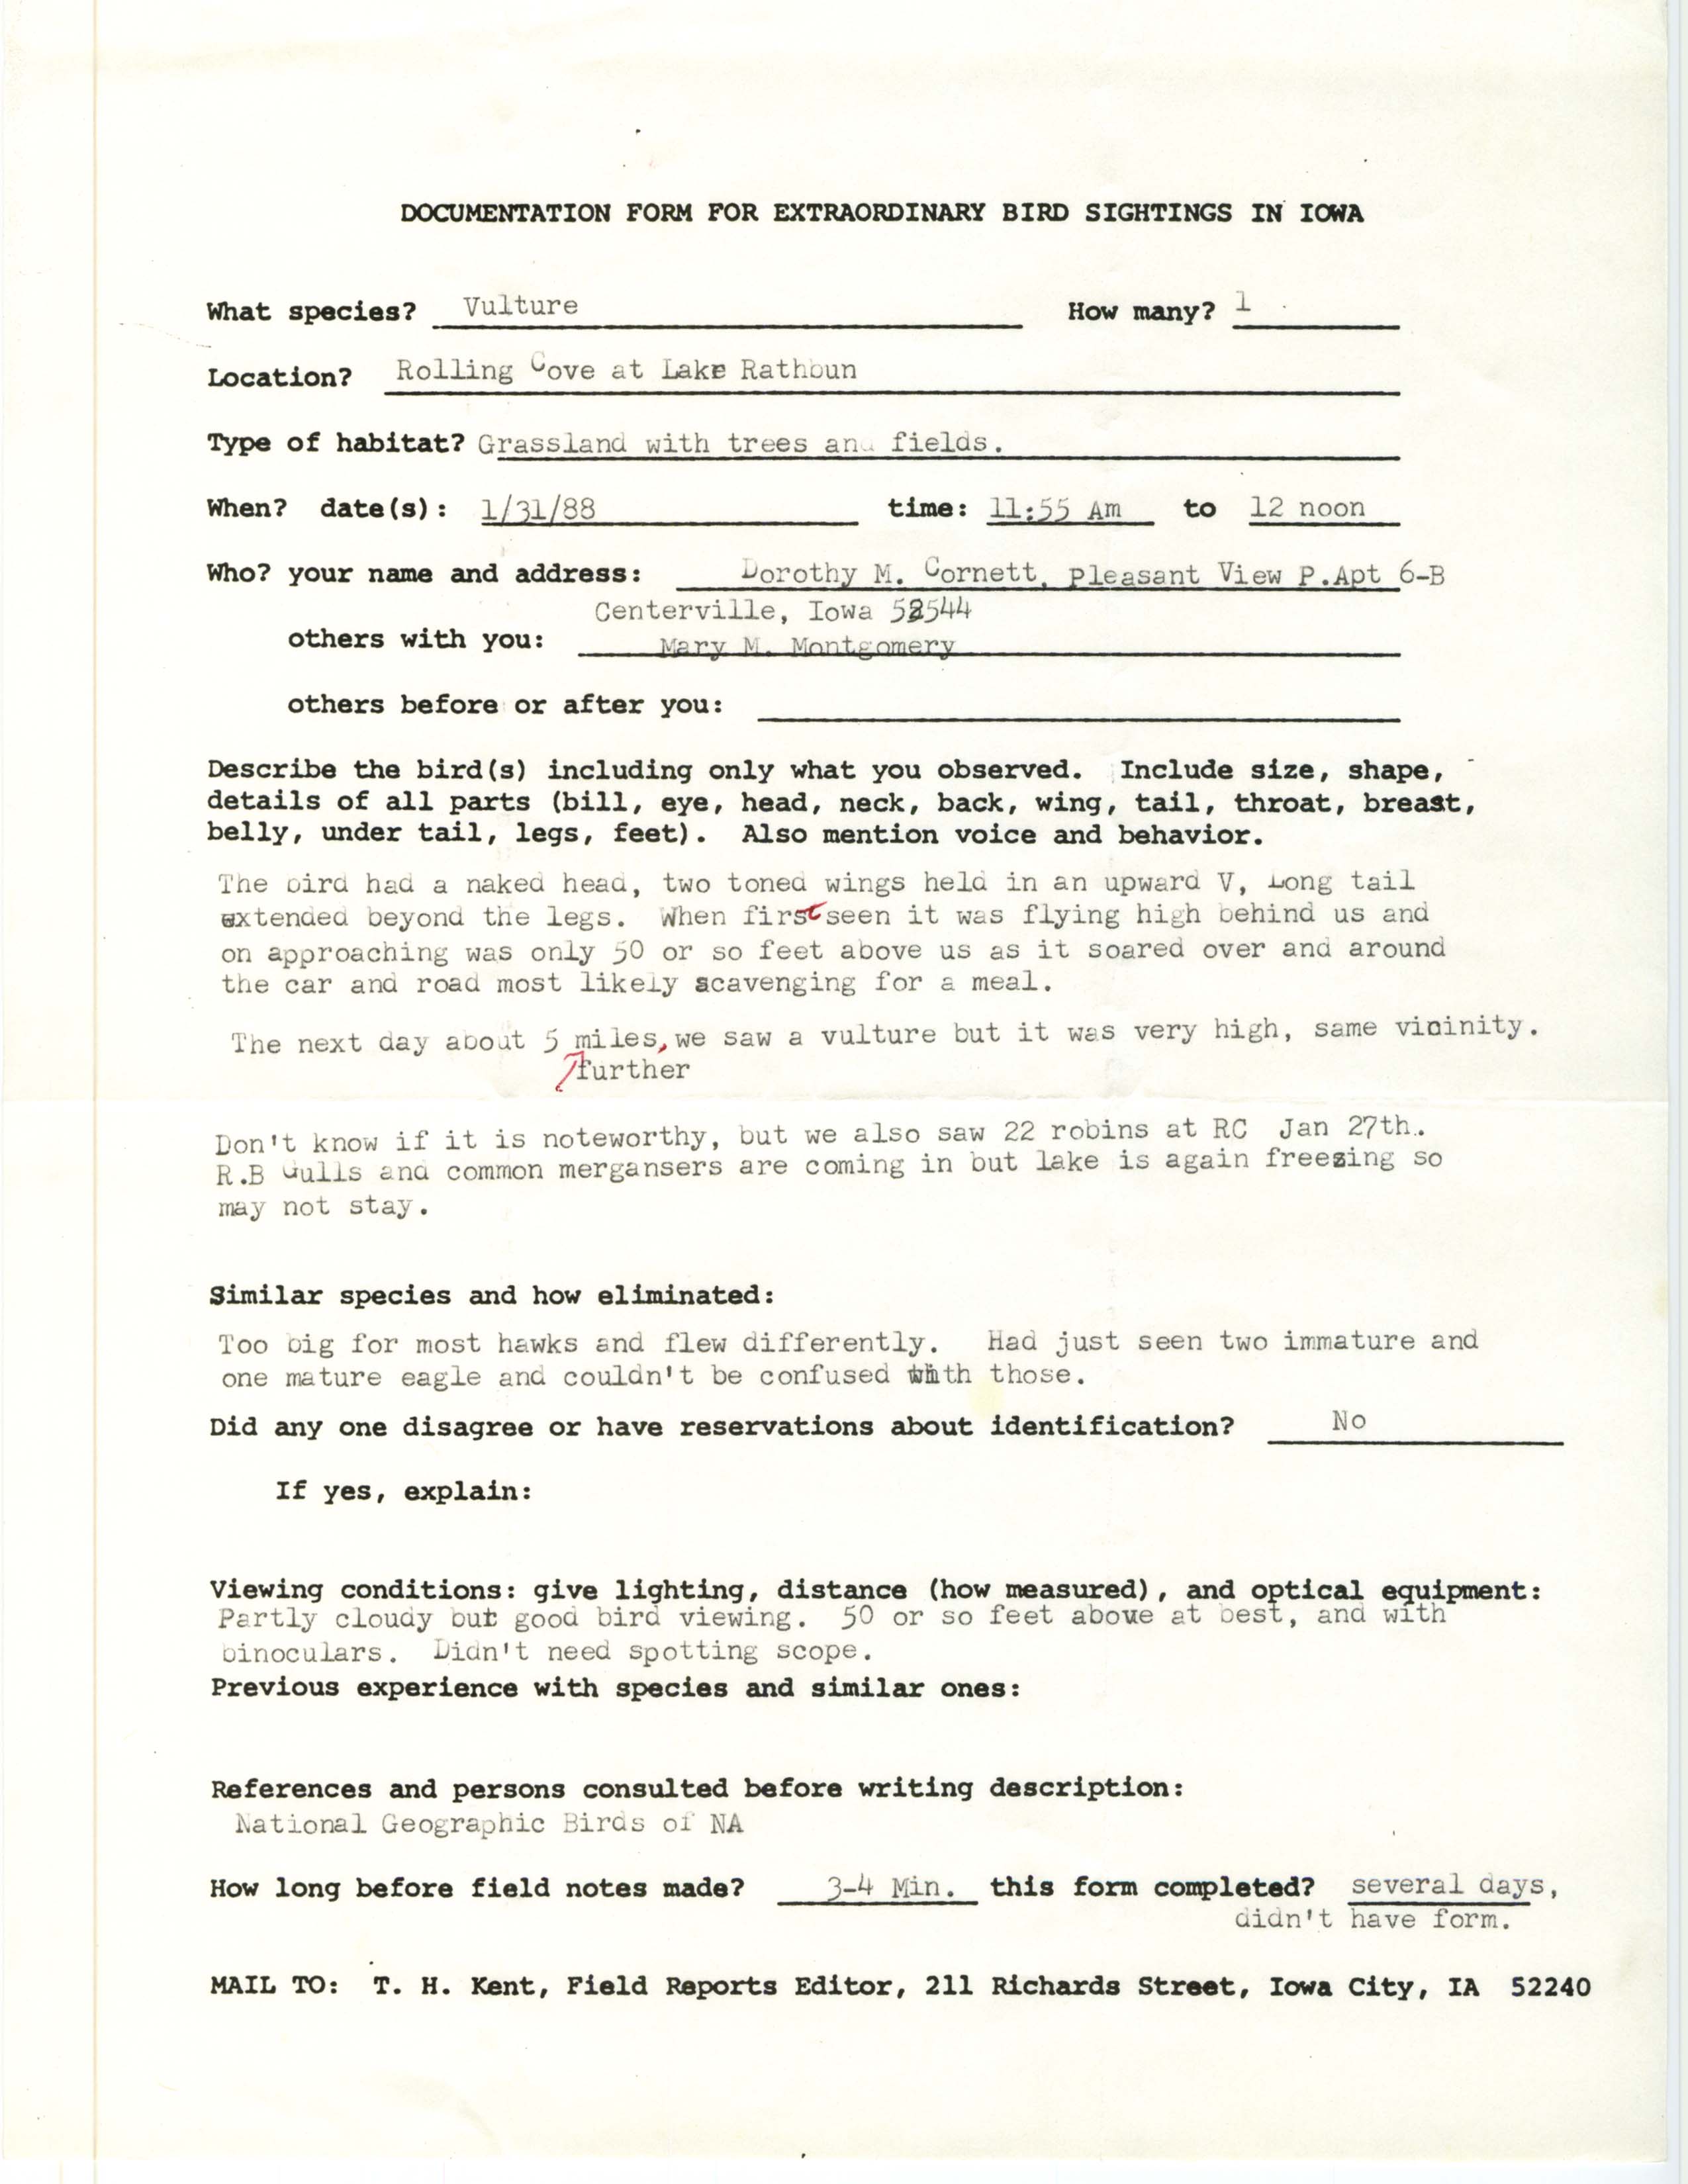 Rare bird documentation form for Turkey Vulture at Rolling Cove, 1988